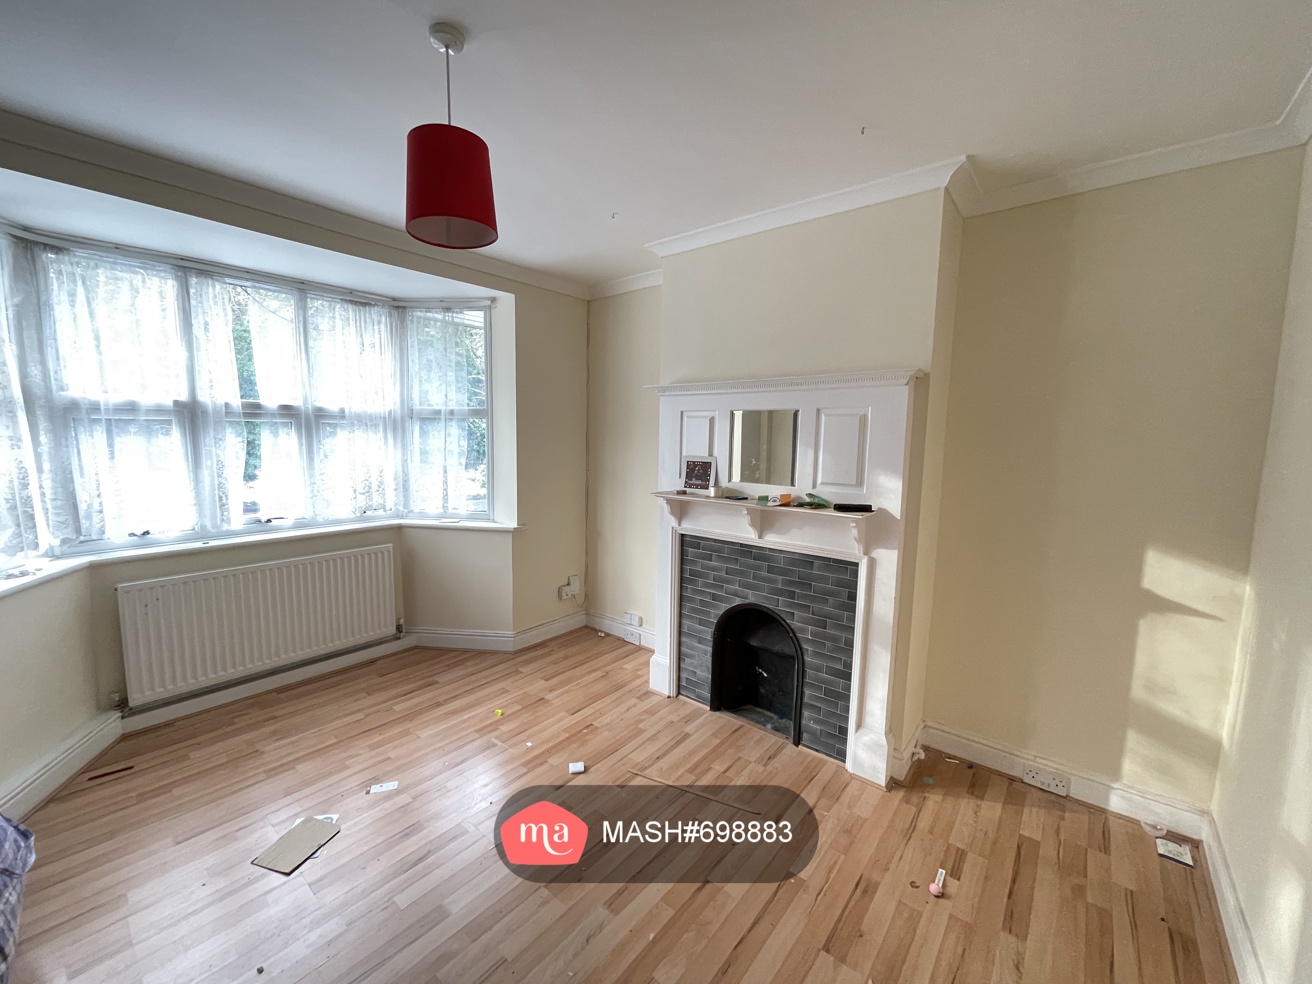 4 Bedroom Terraced to rent in Sutton - Mashroom